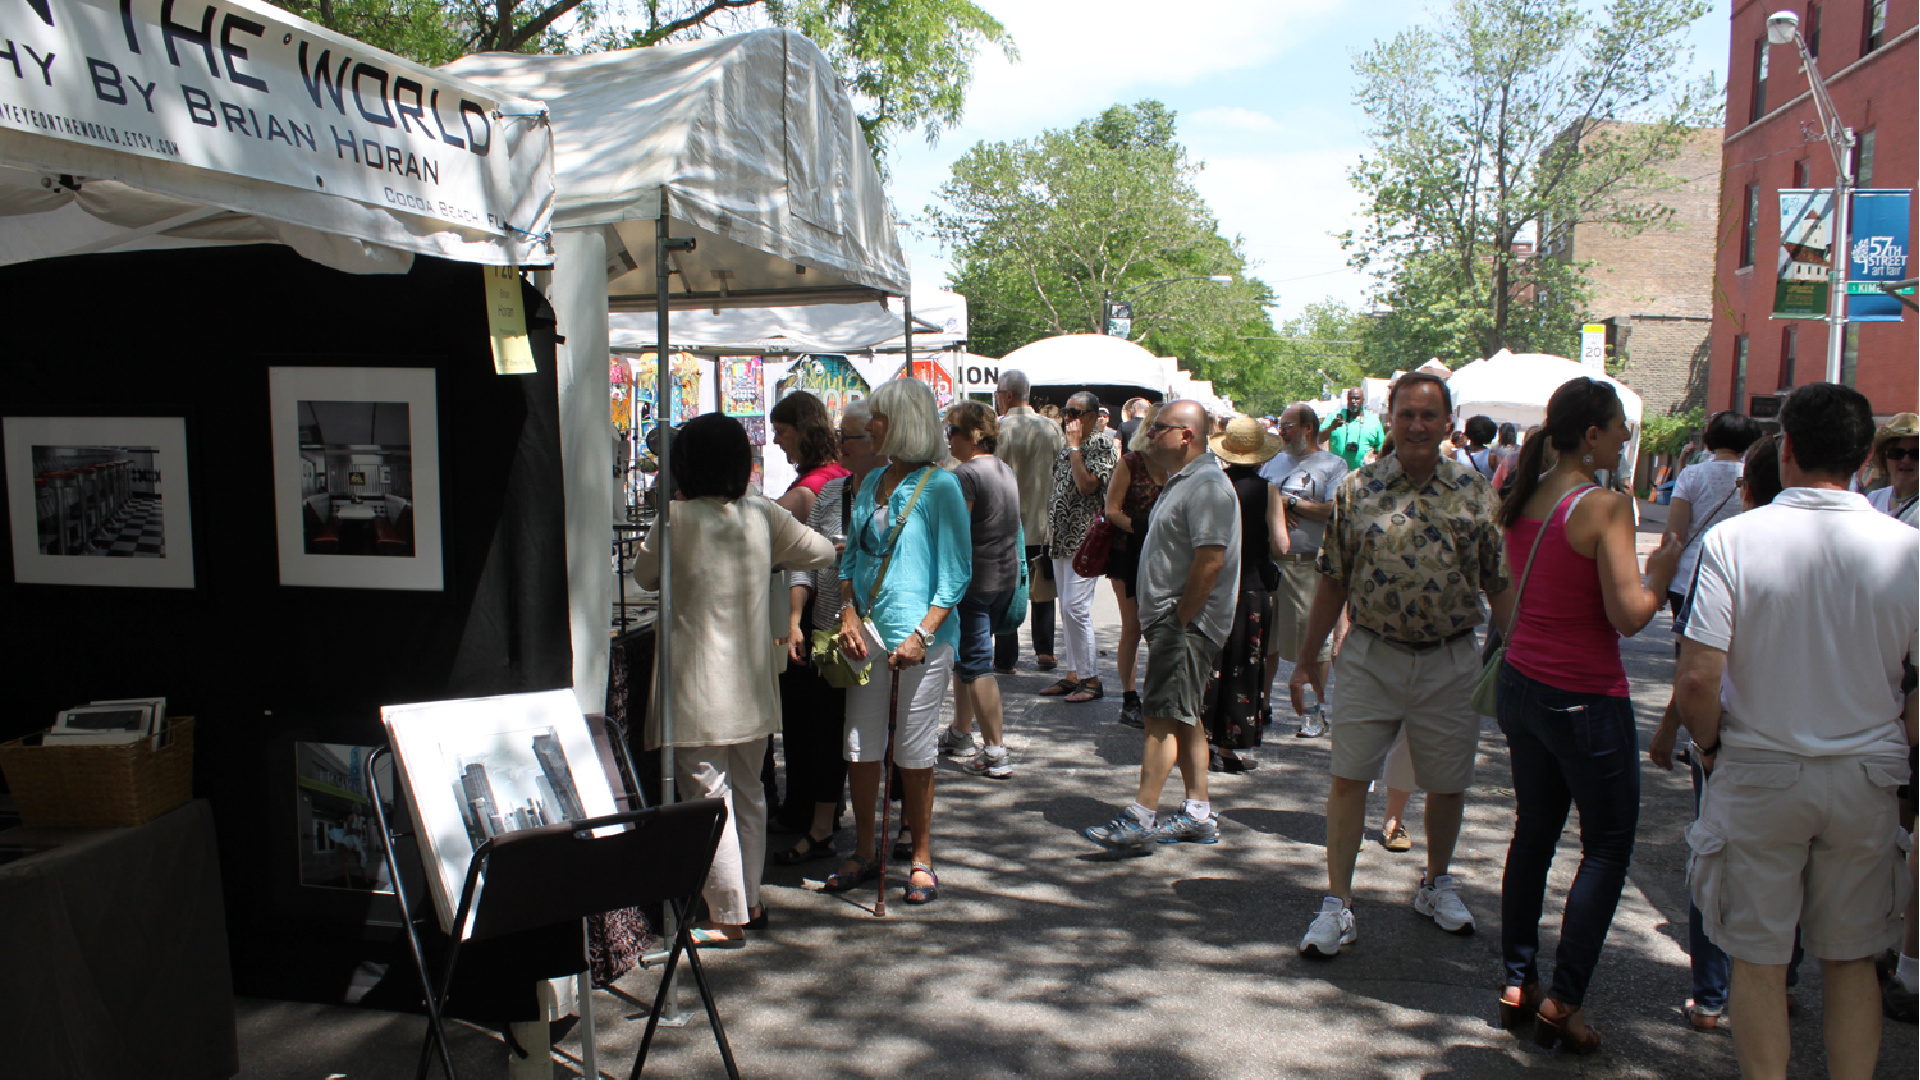 57th Street Art Fair Brings More Than 150 Artists To Hyde Park This Weekend